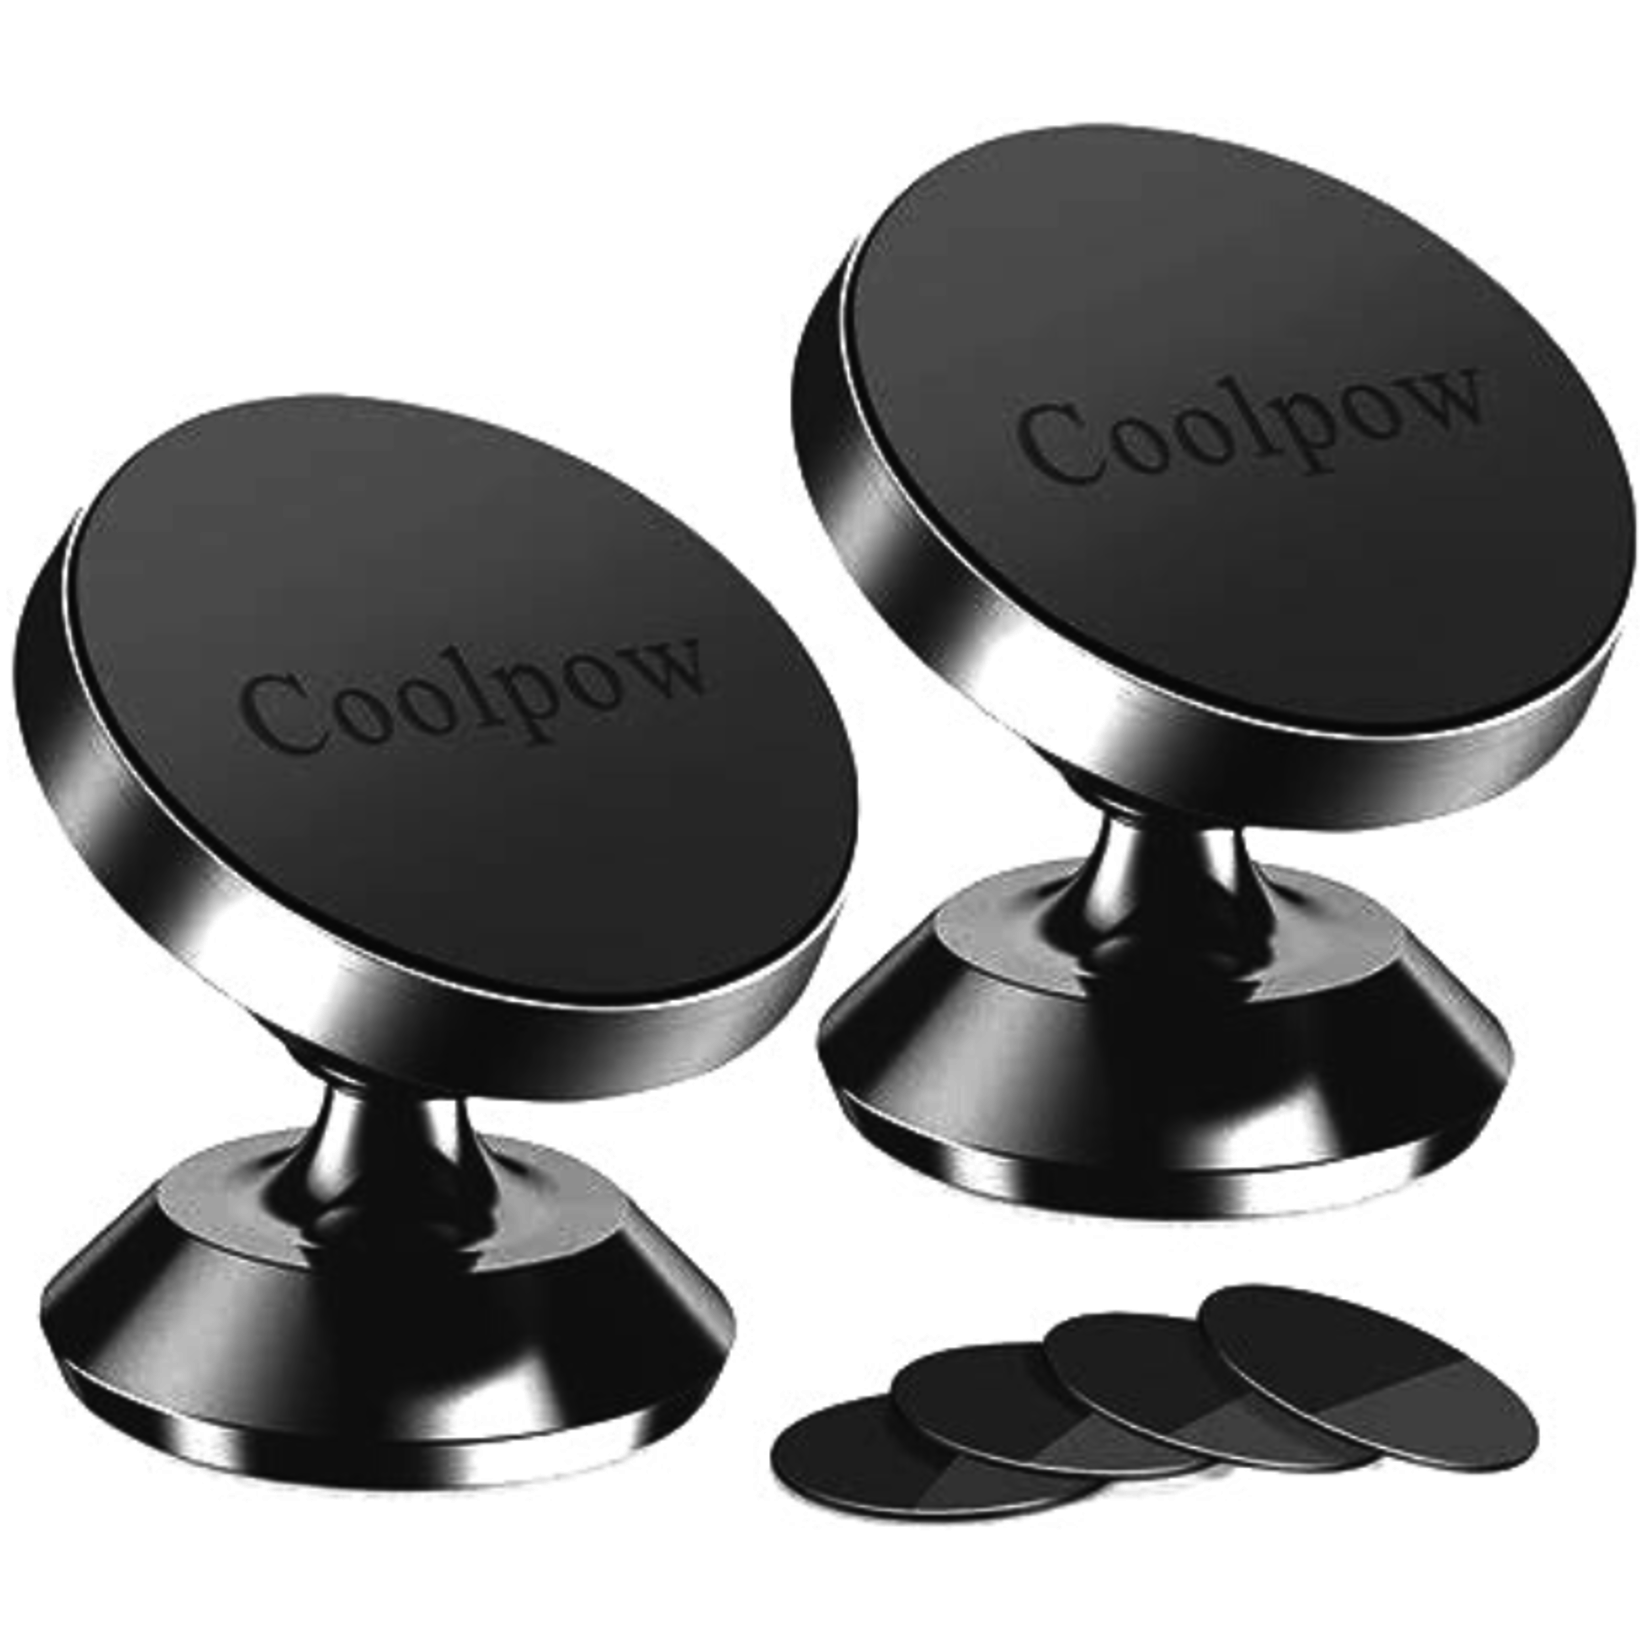 Coolpow Magnetic Phone Mount - 2 Pack